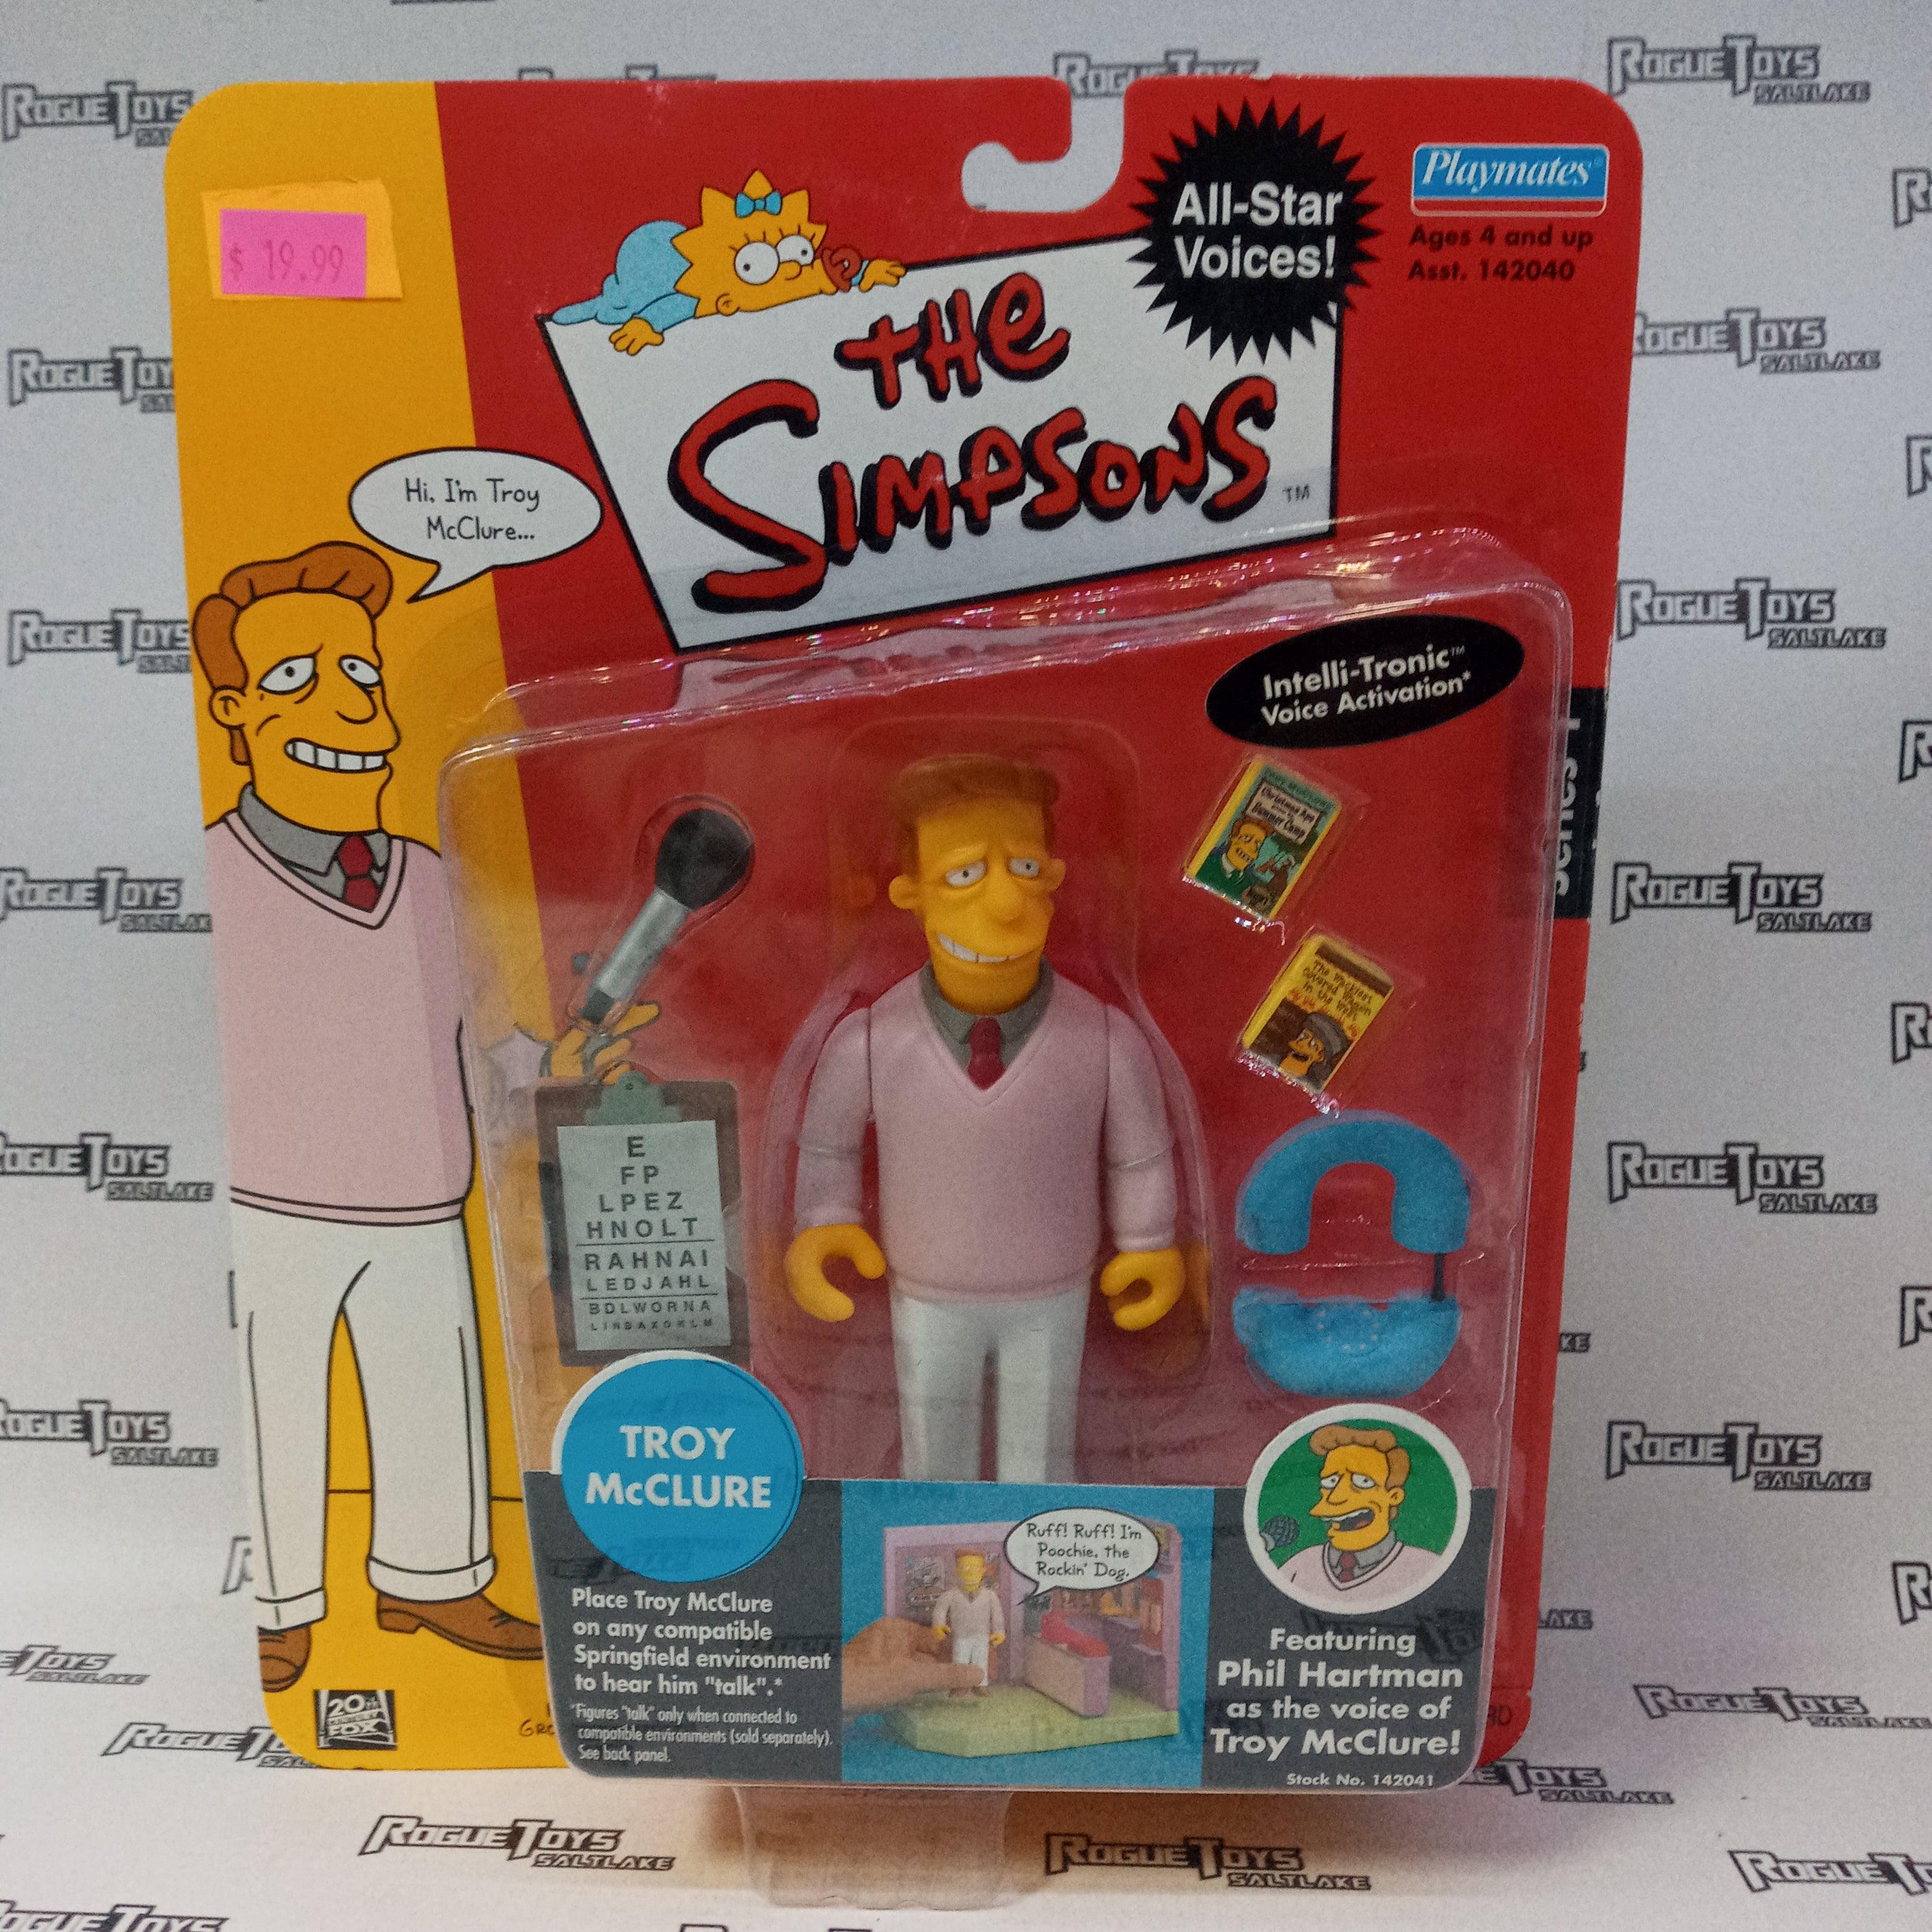 Playmates The Simpsons Series 1 Troy McClure - Rogue Toys